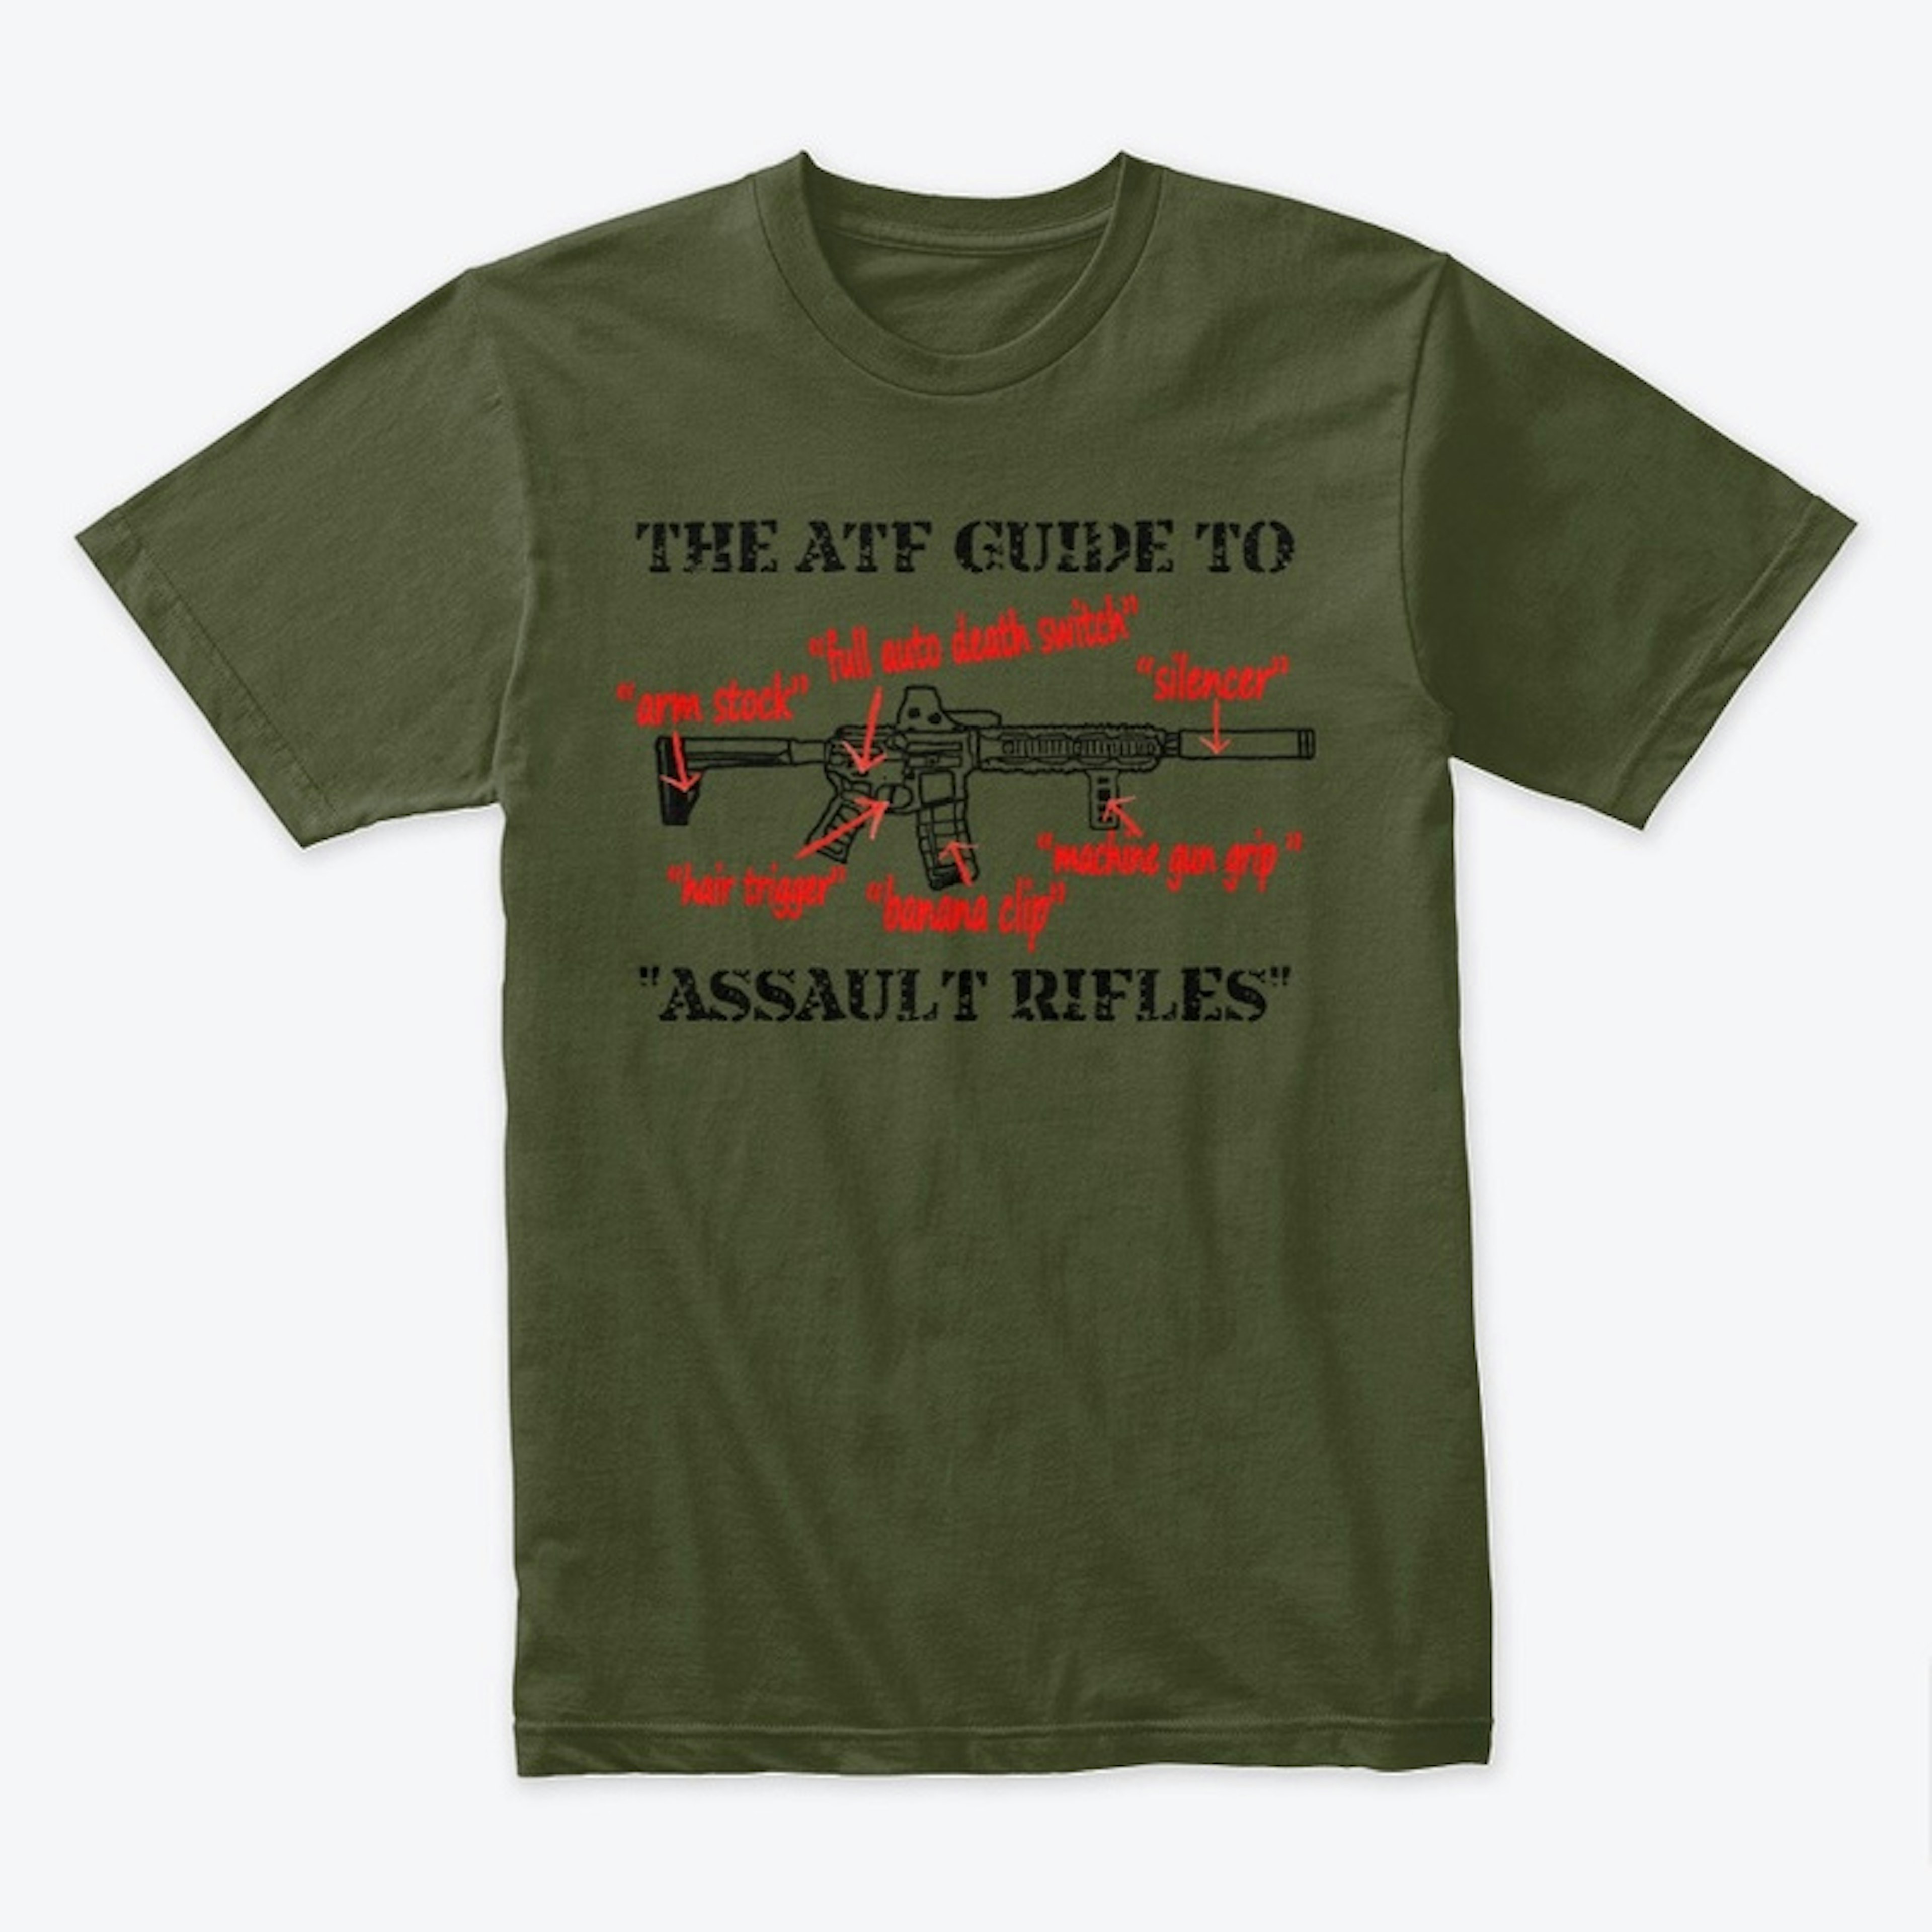 The ATF Guide to Assault Rifles